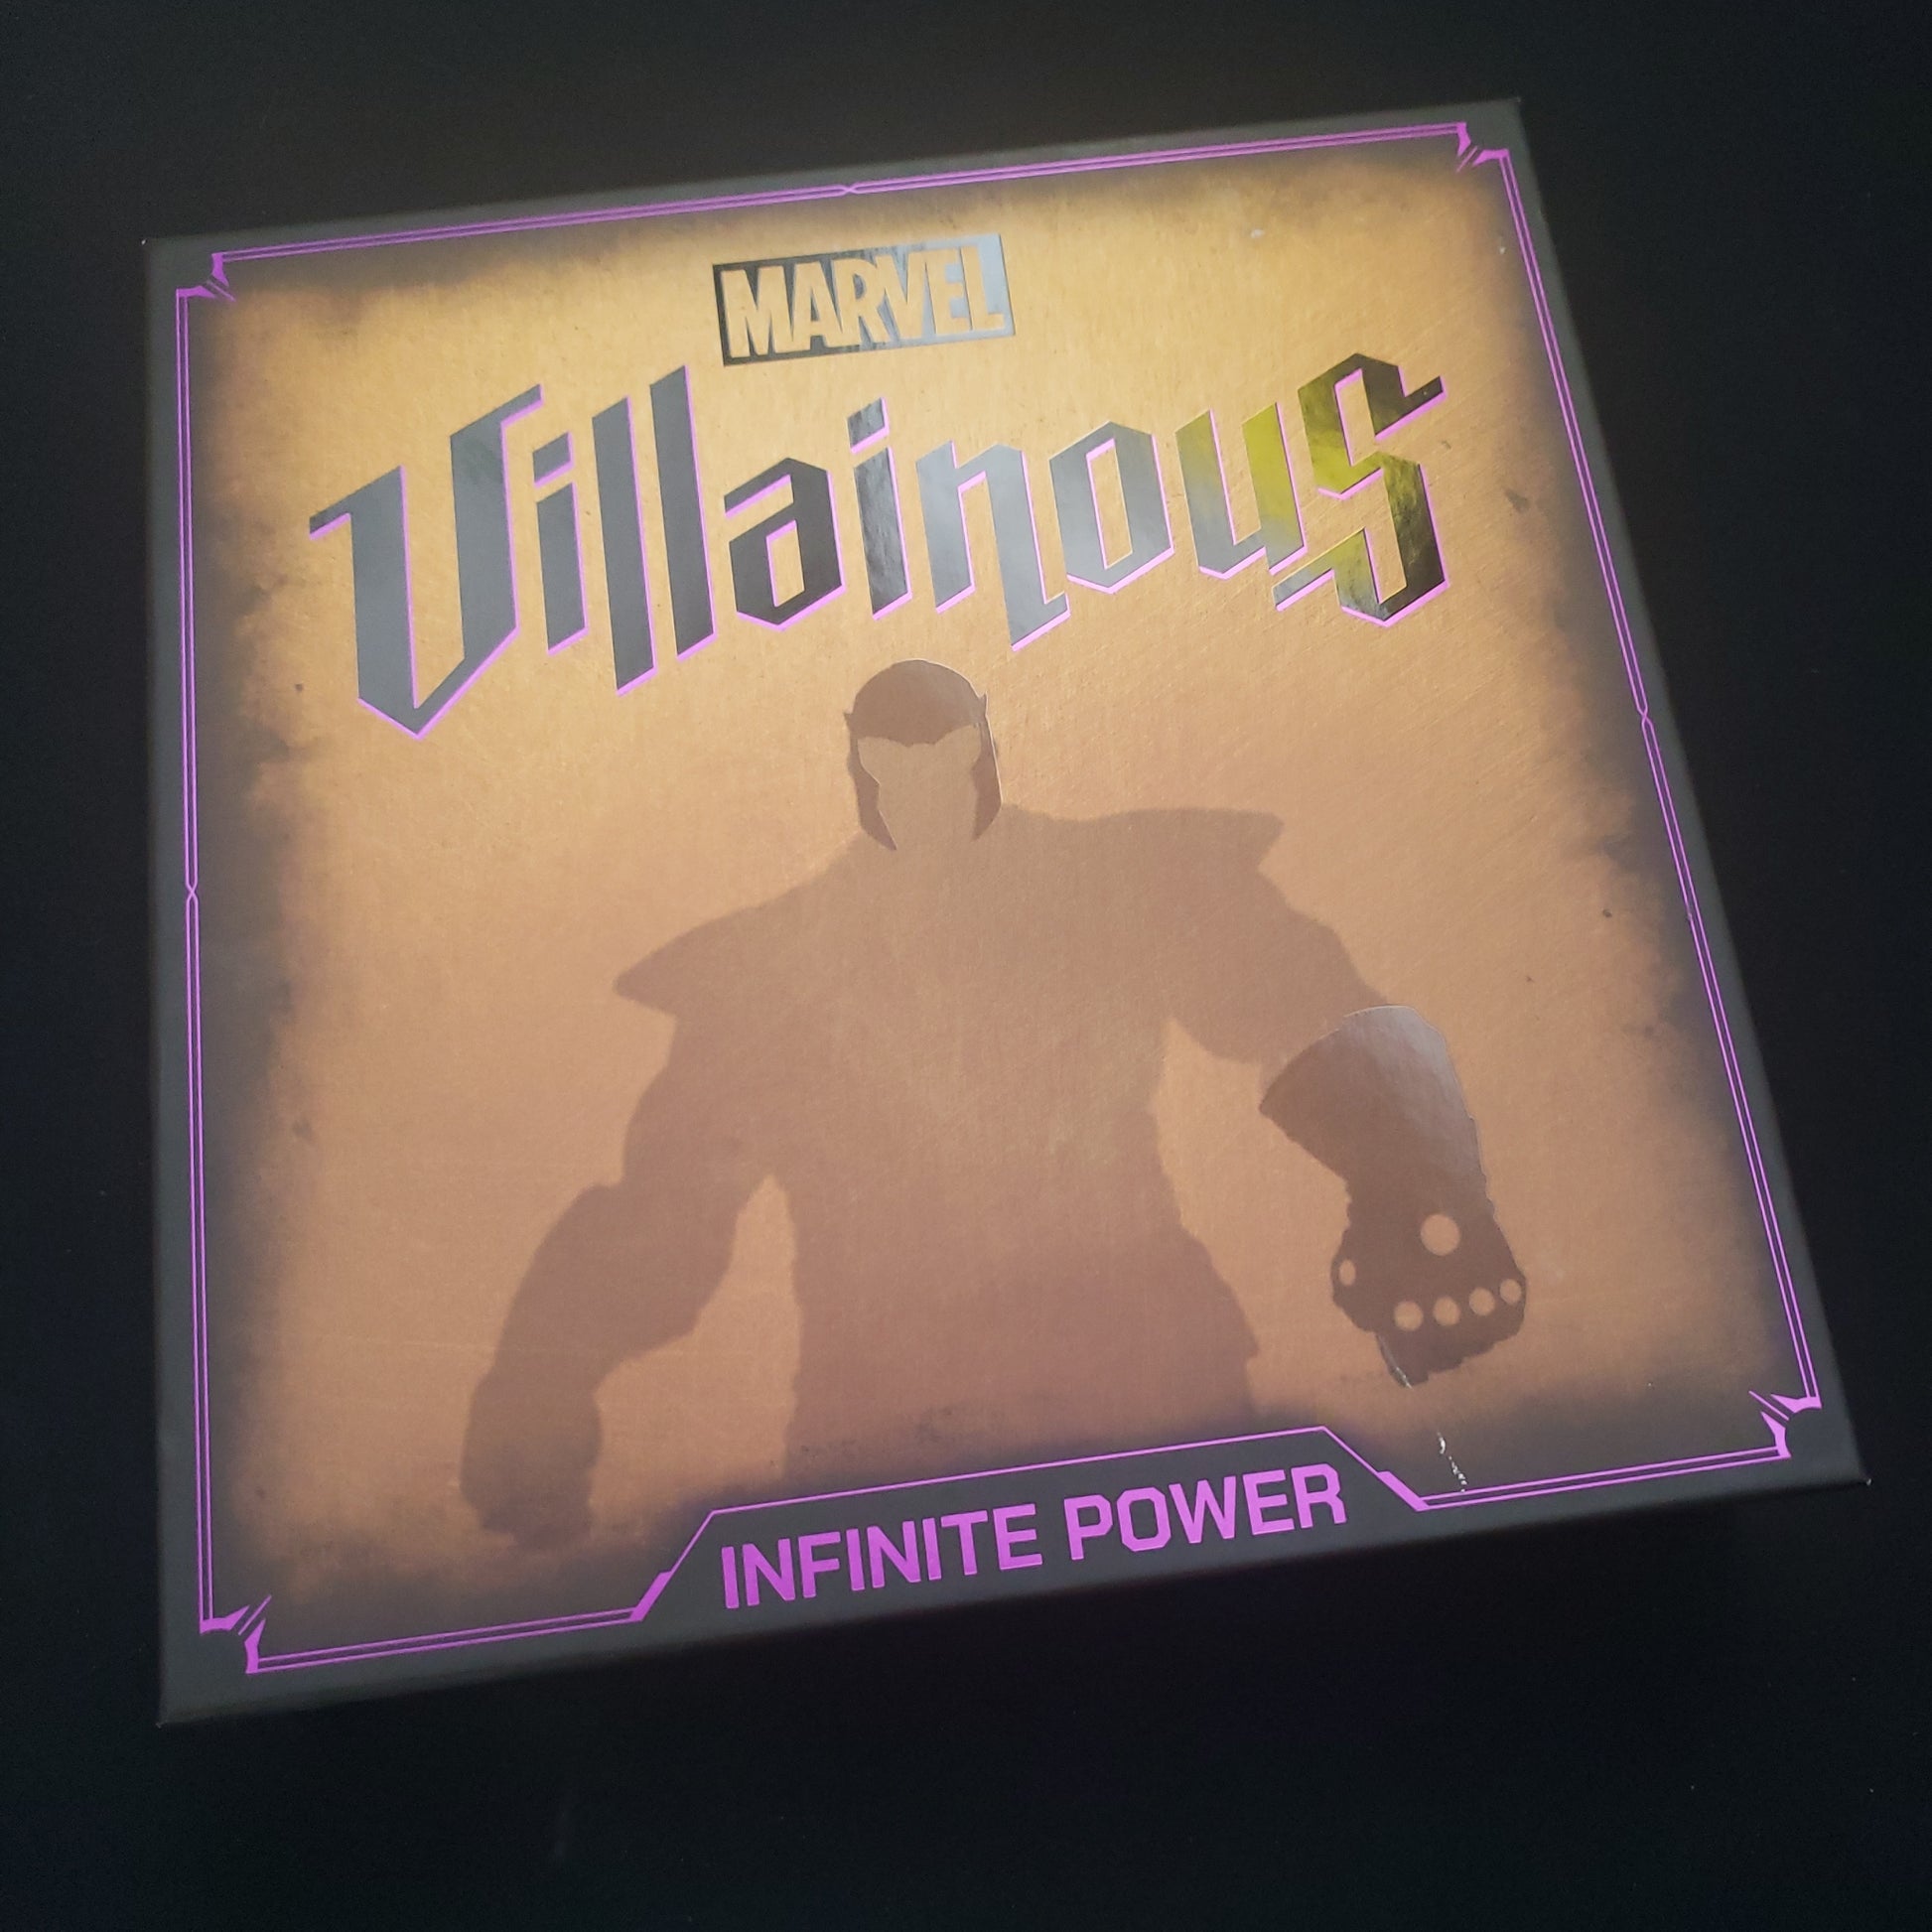 Image shows the front cover of the box of the Marvel Villainous: Infinite Power board game